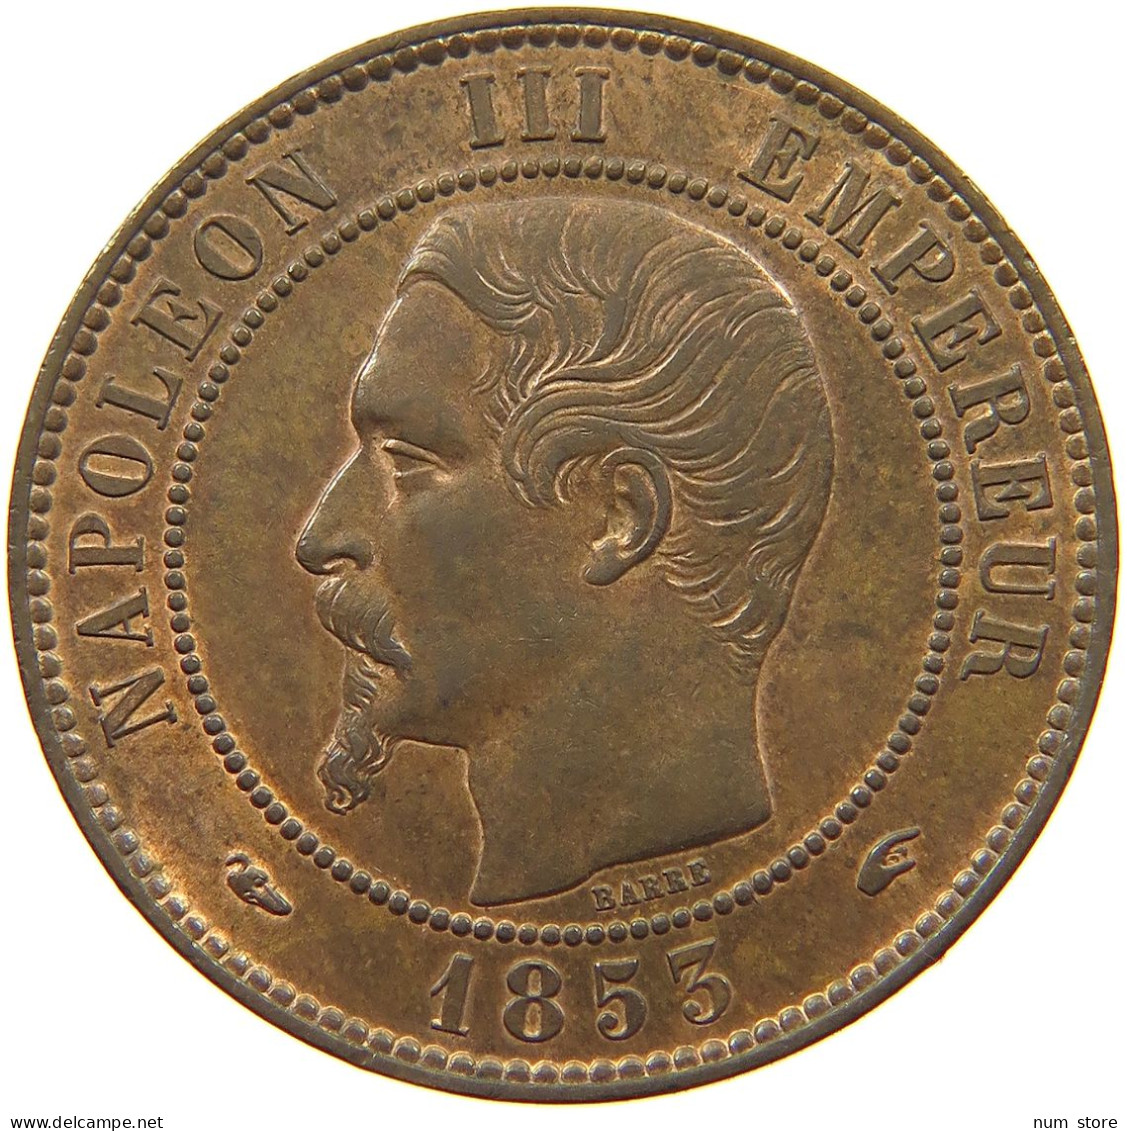 FRANCE 10 CENTIMES 1853 A Napoleon III. (1852-1870) #t112 1039 - 10 Centimes